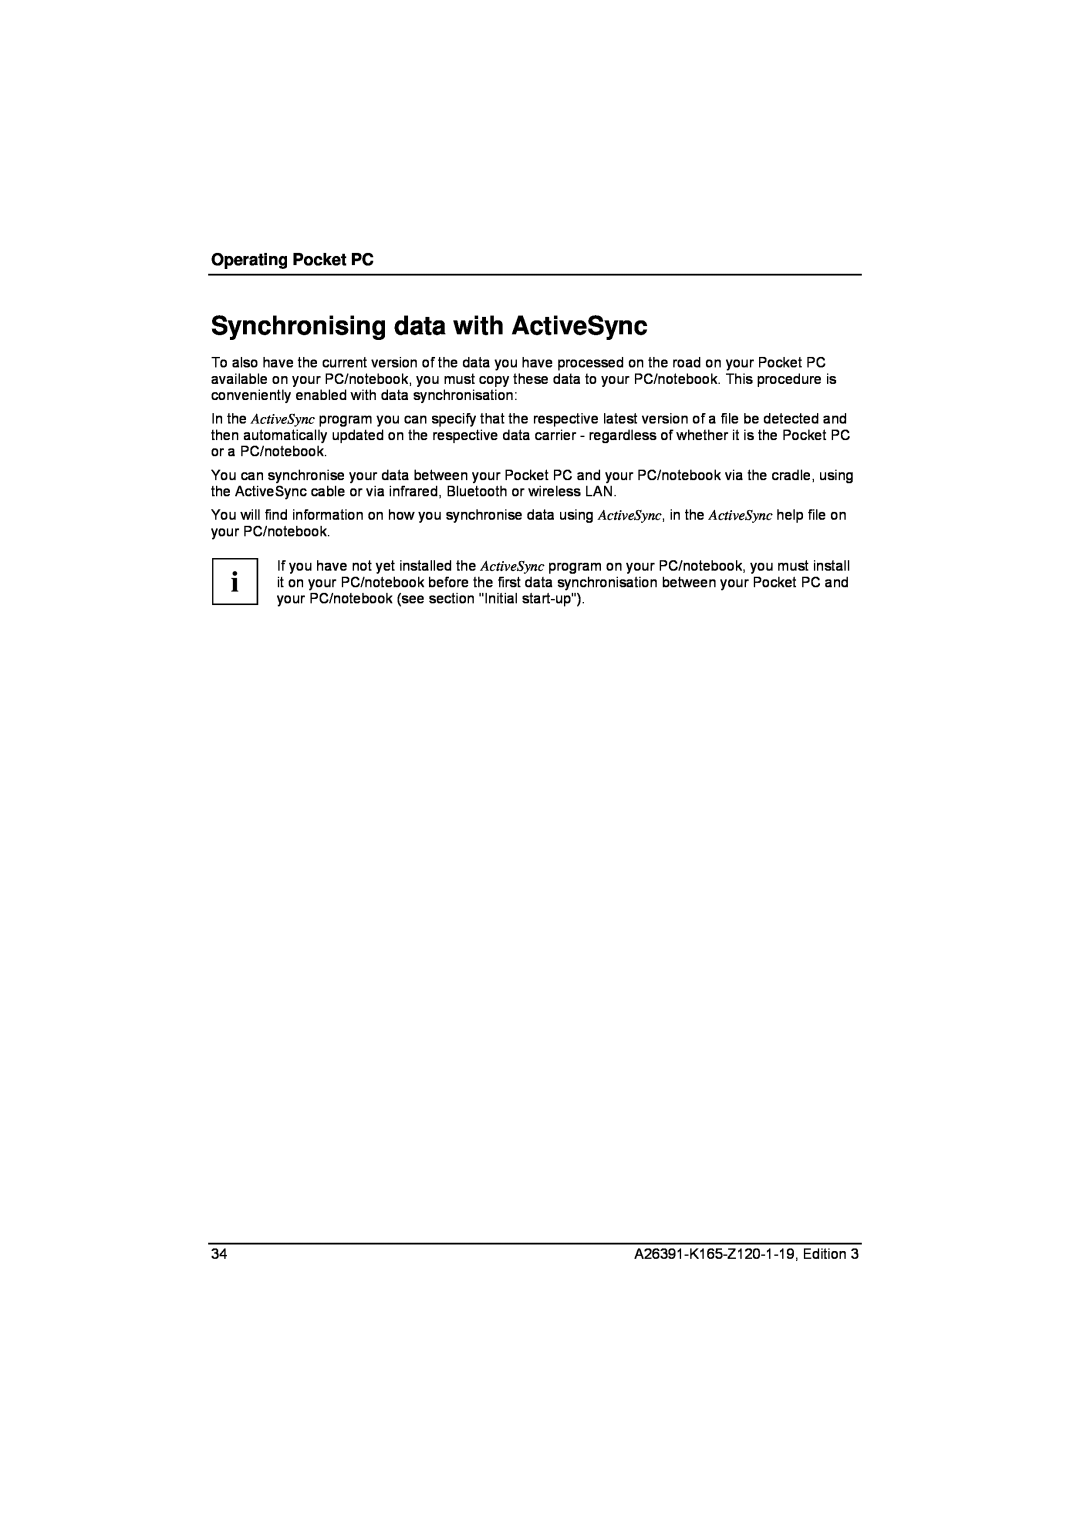 Zweita  Co N/C Series manual Synchronising data with ActiveSync, Operating Pocket PC 